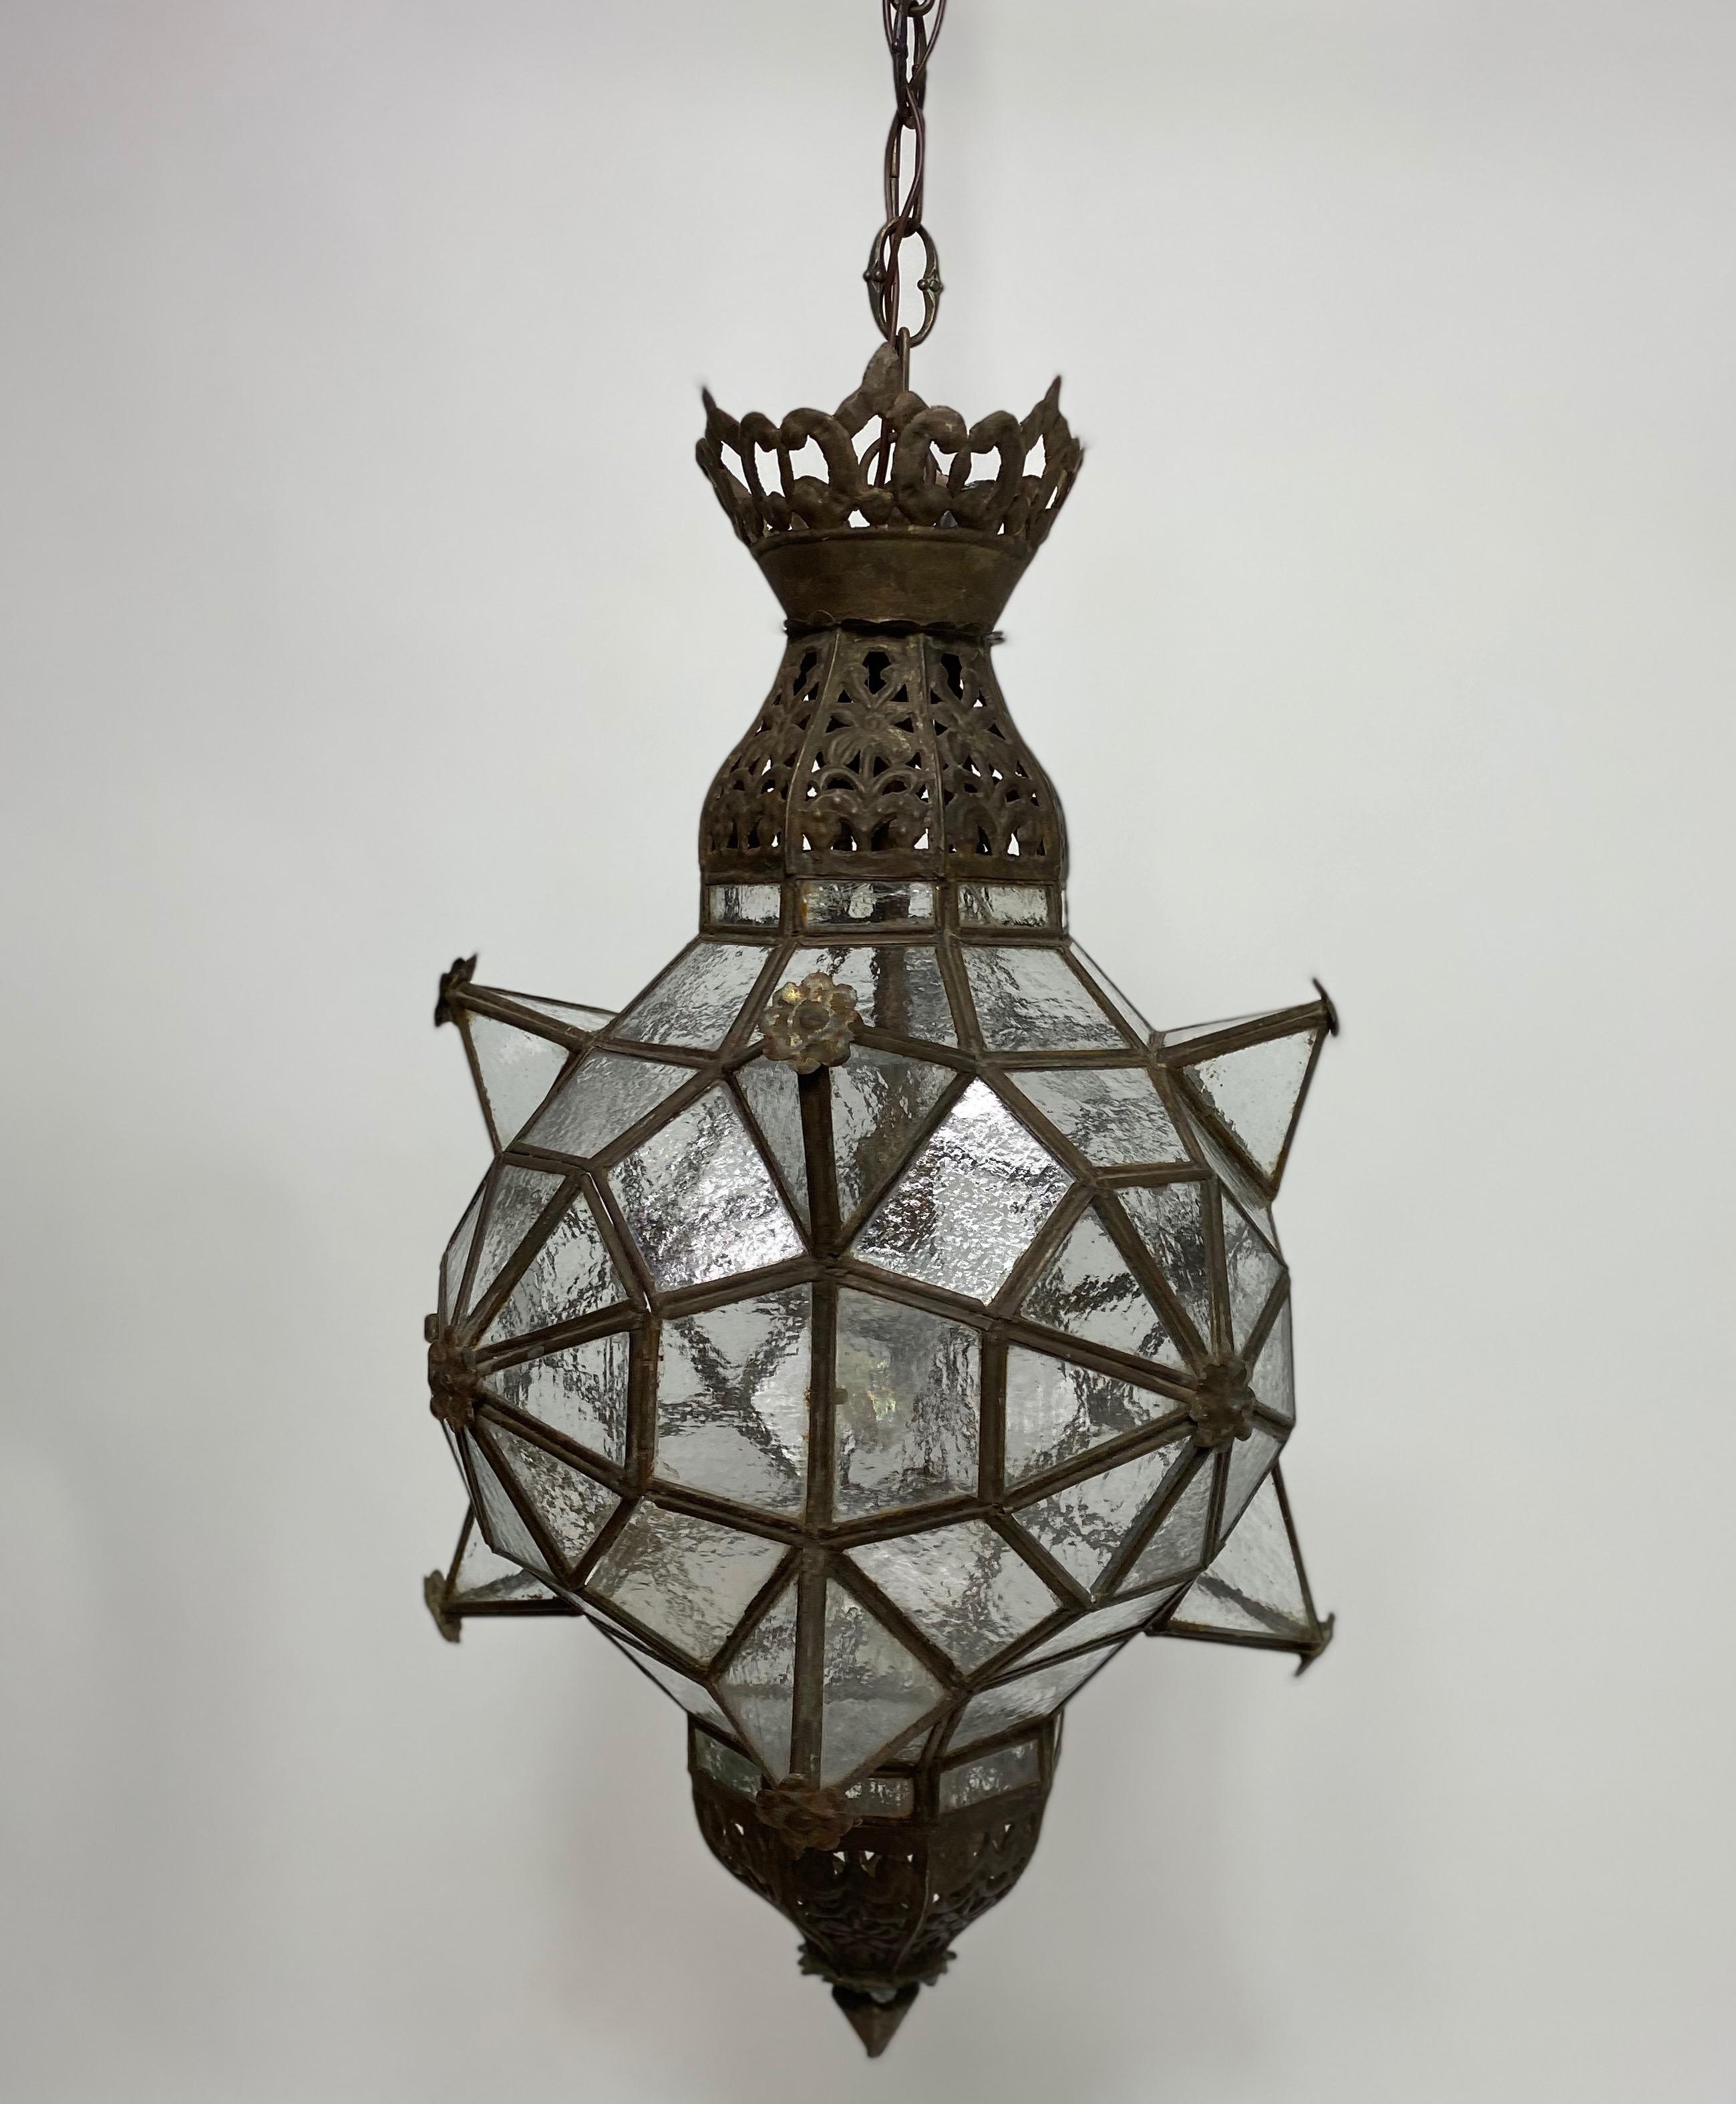 Hand-Crafted Large Antique Moroccan Style Lantern, circa 1900